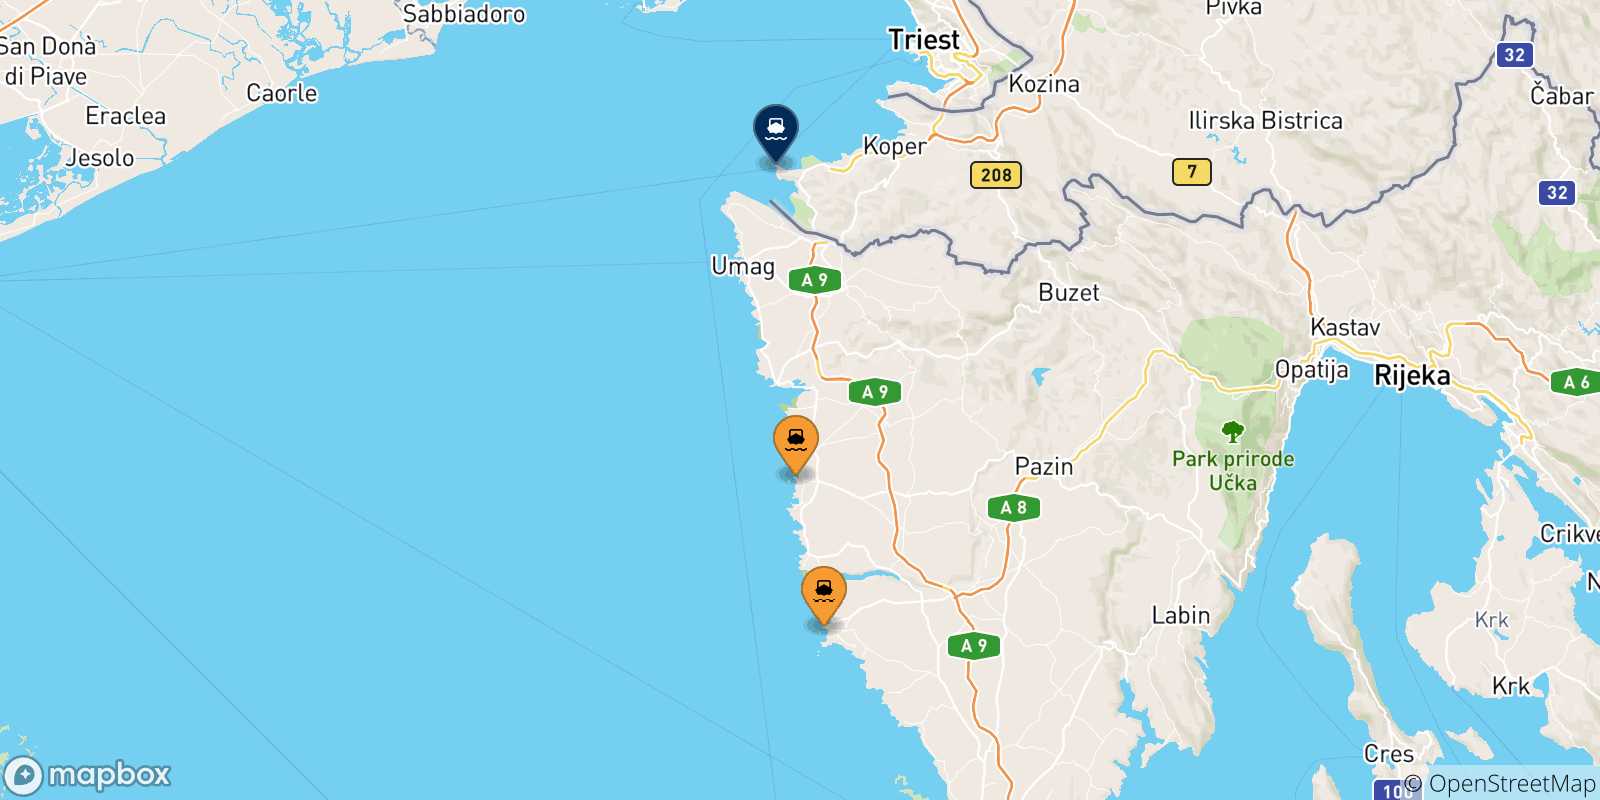 Map of the possible routes between Croatia and Piran